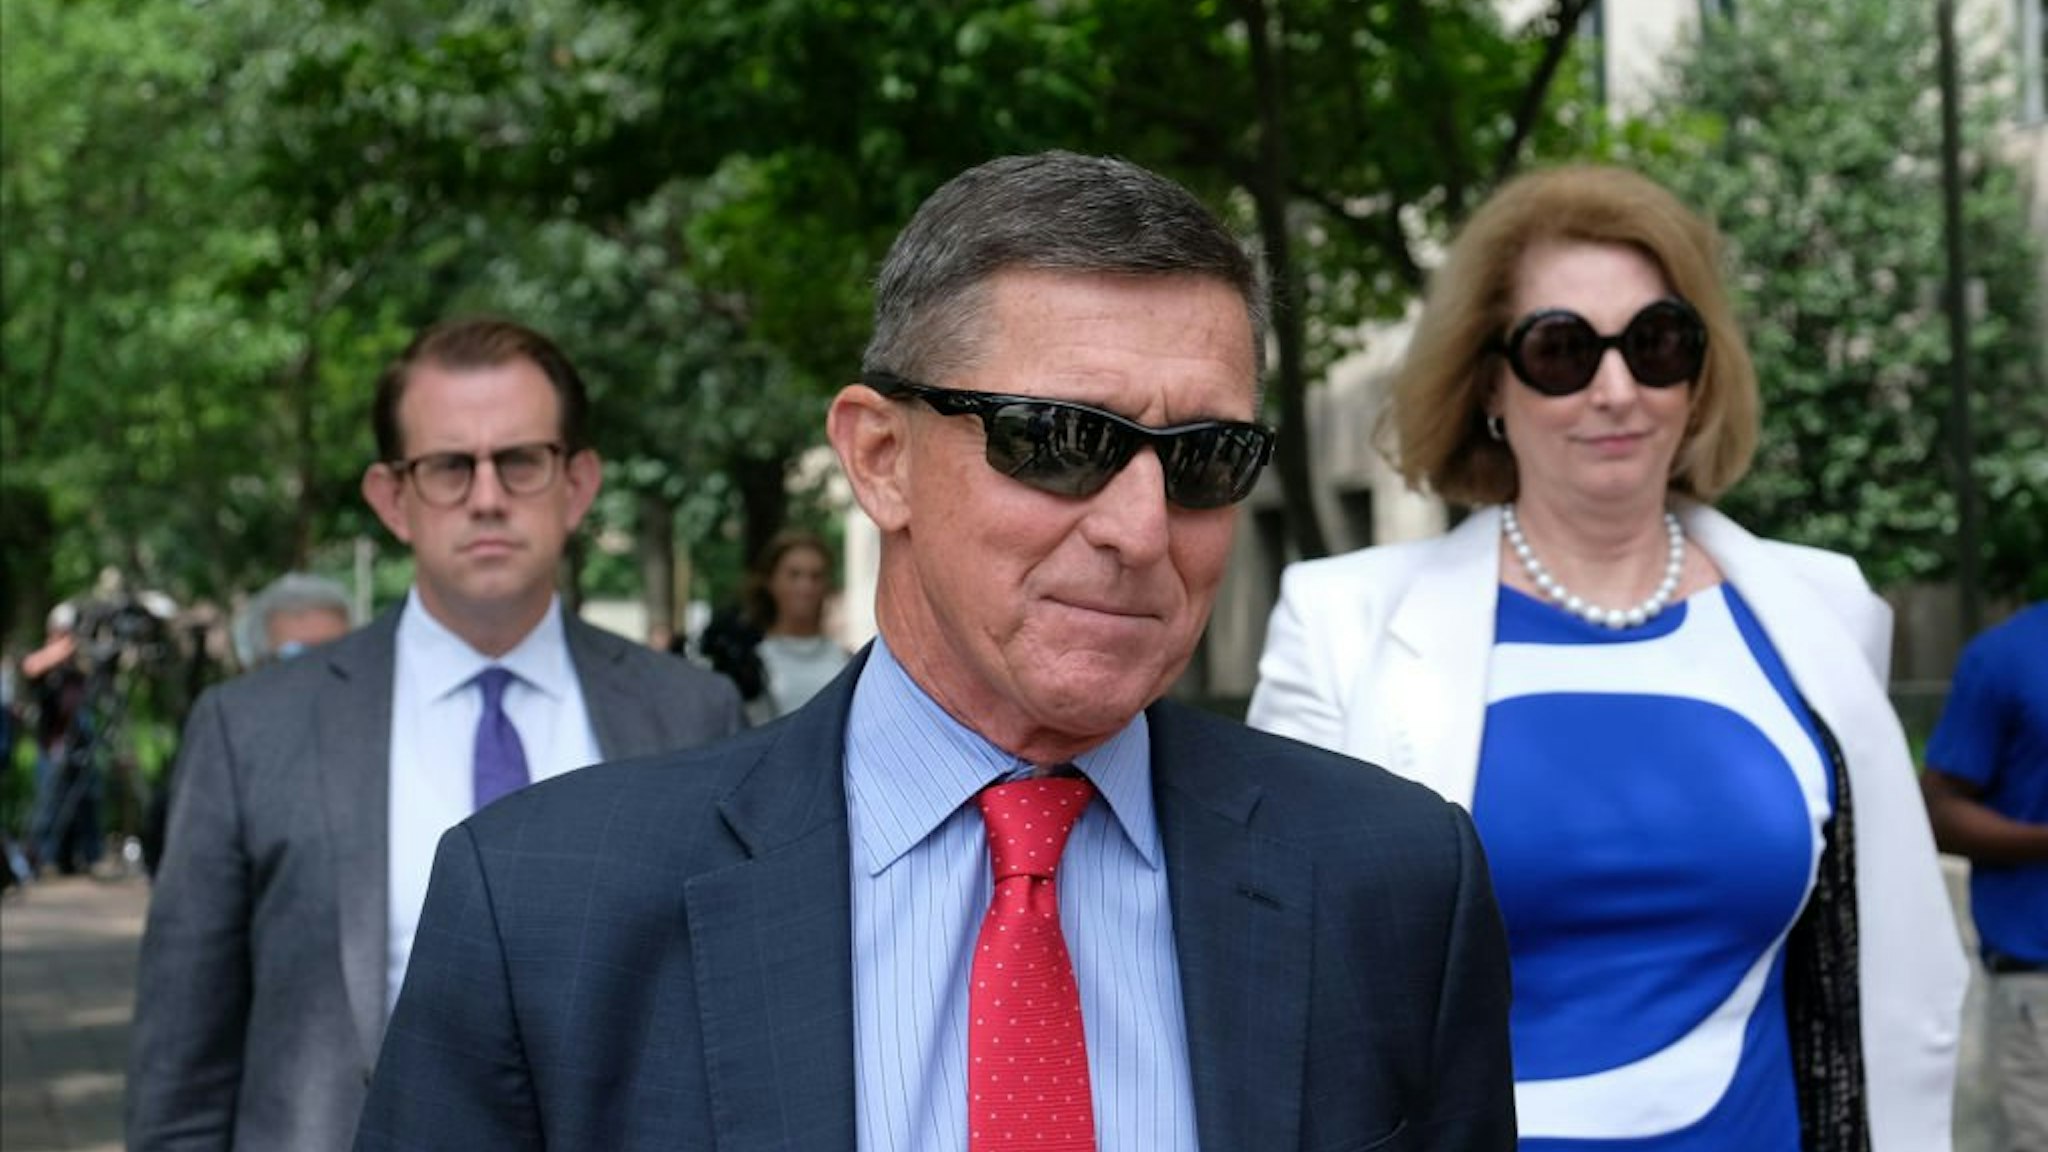 President Donald Trump‚Äôs former National Security Adviser Michael Flynn leaves the E. Barrett Prettyman U.S. Courthouse on June 24, 2019 in Washington, DC. criminal sentencing for Flynn will be on hold for at least another two months.